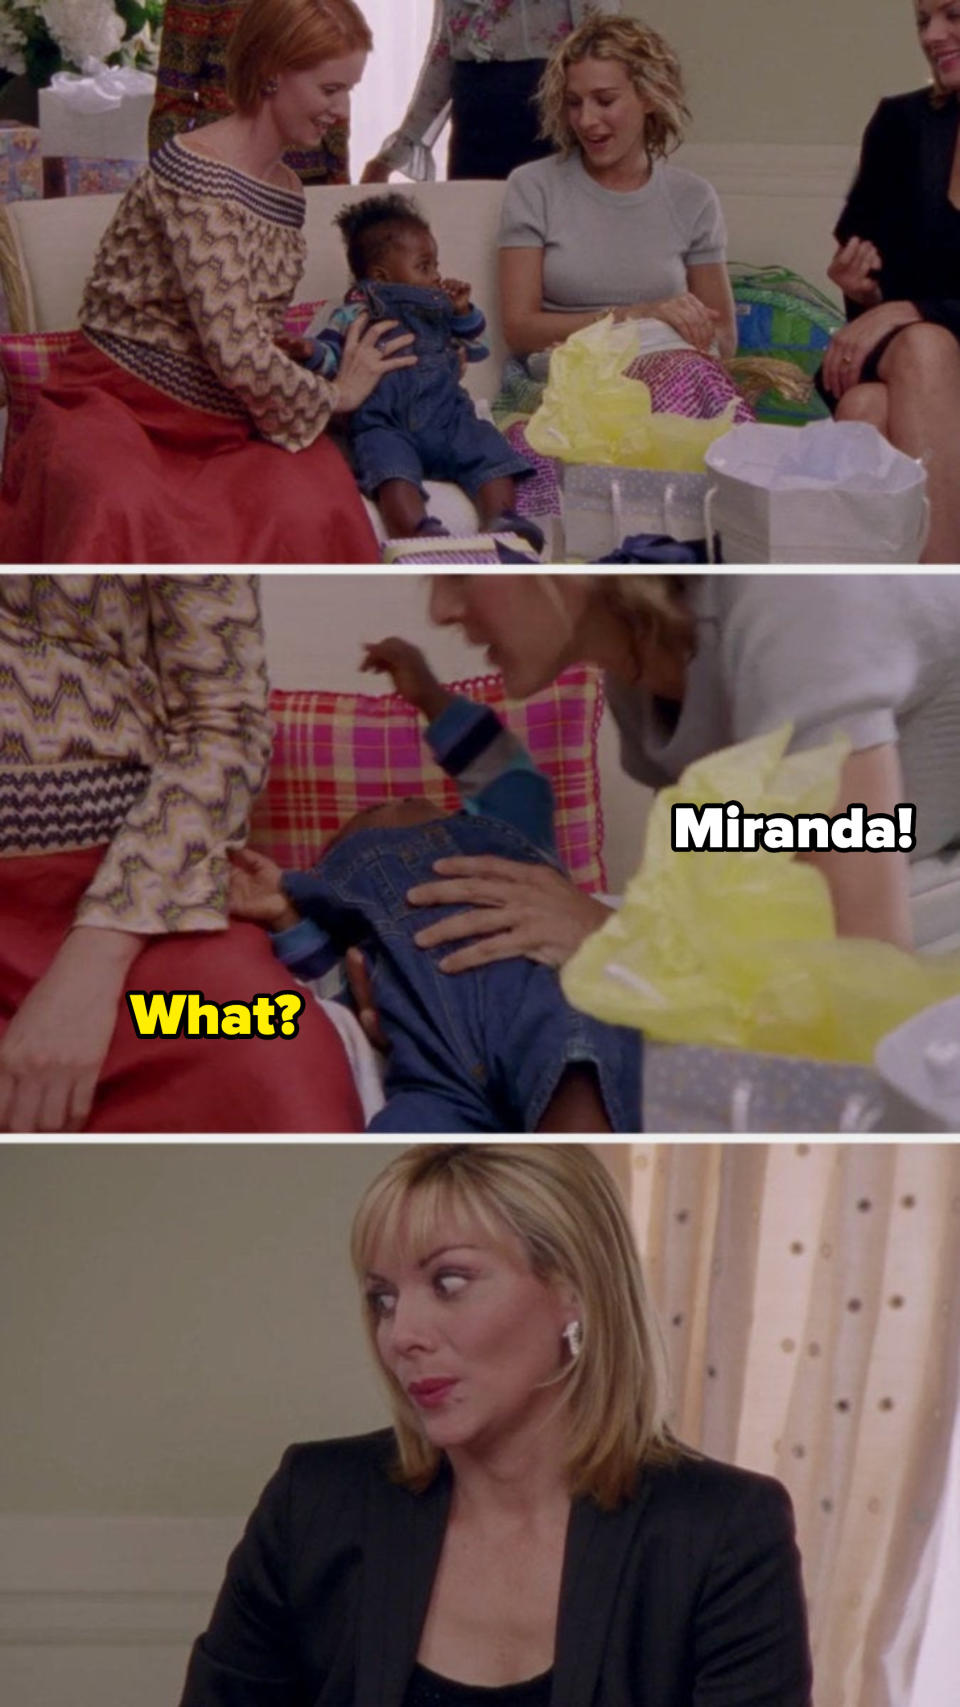 Carrie yelling at Miranda while her coworker's baby is slipping off the couch, Samantha reacting in a shocked way